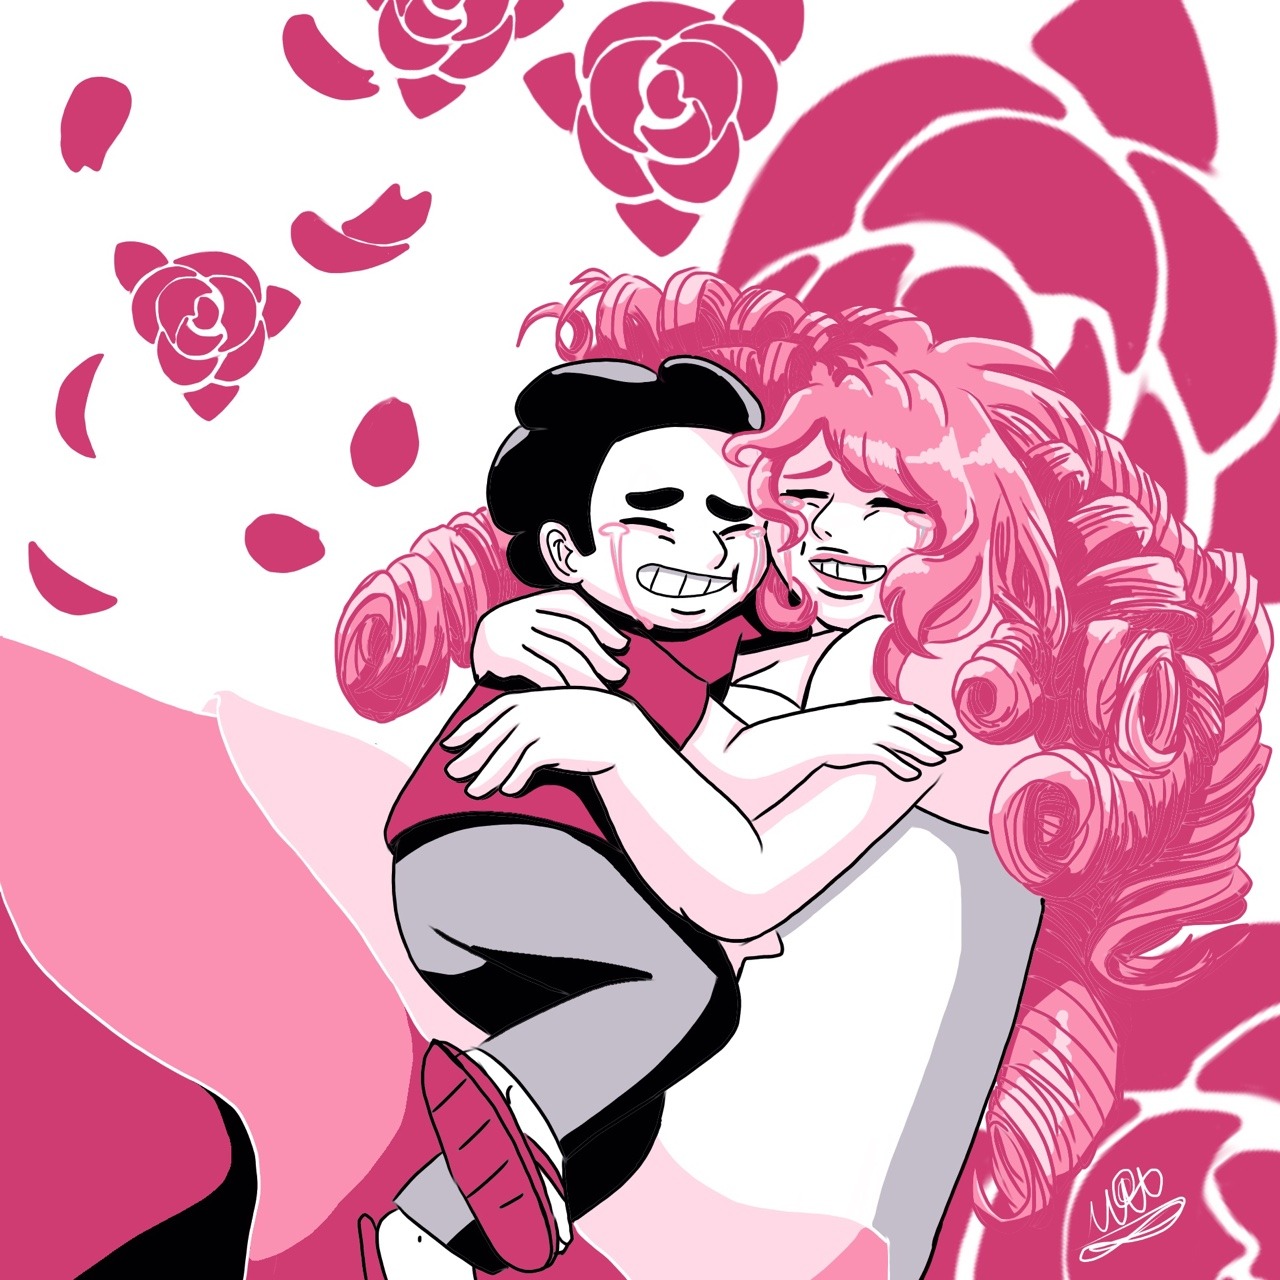 Here is Steven and Rose inspired by this color palette